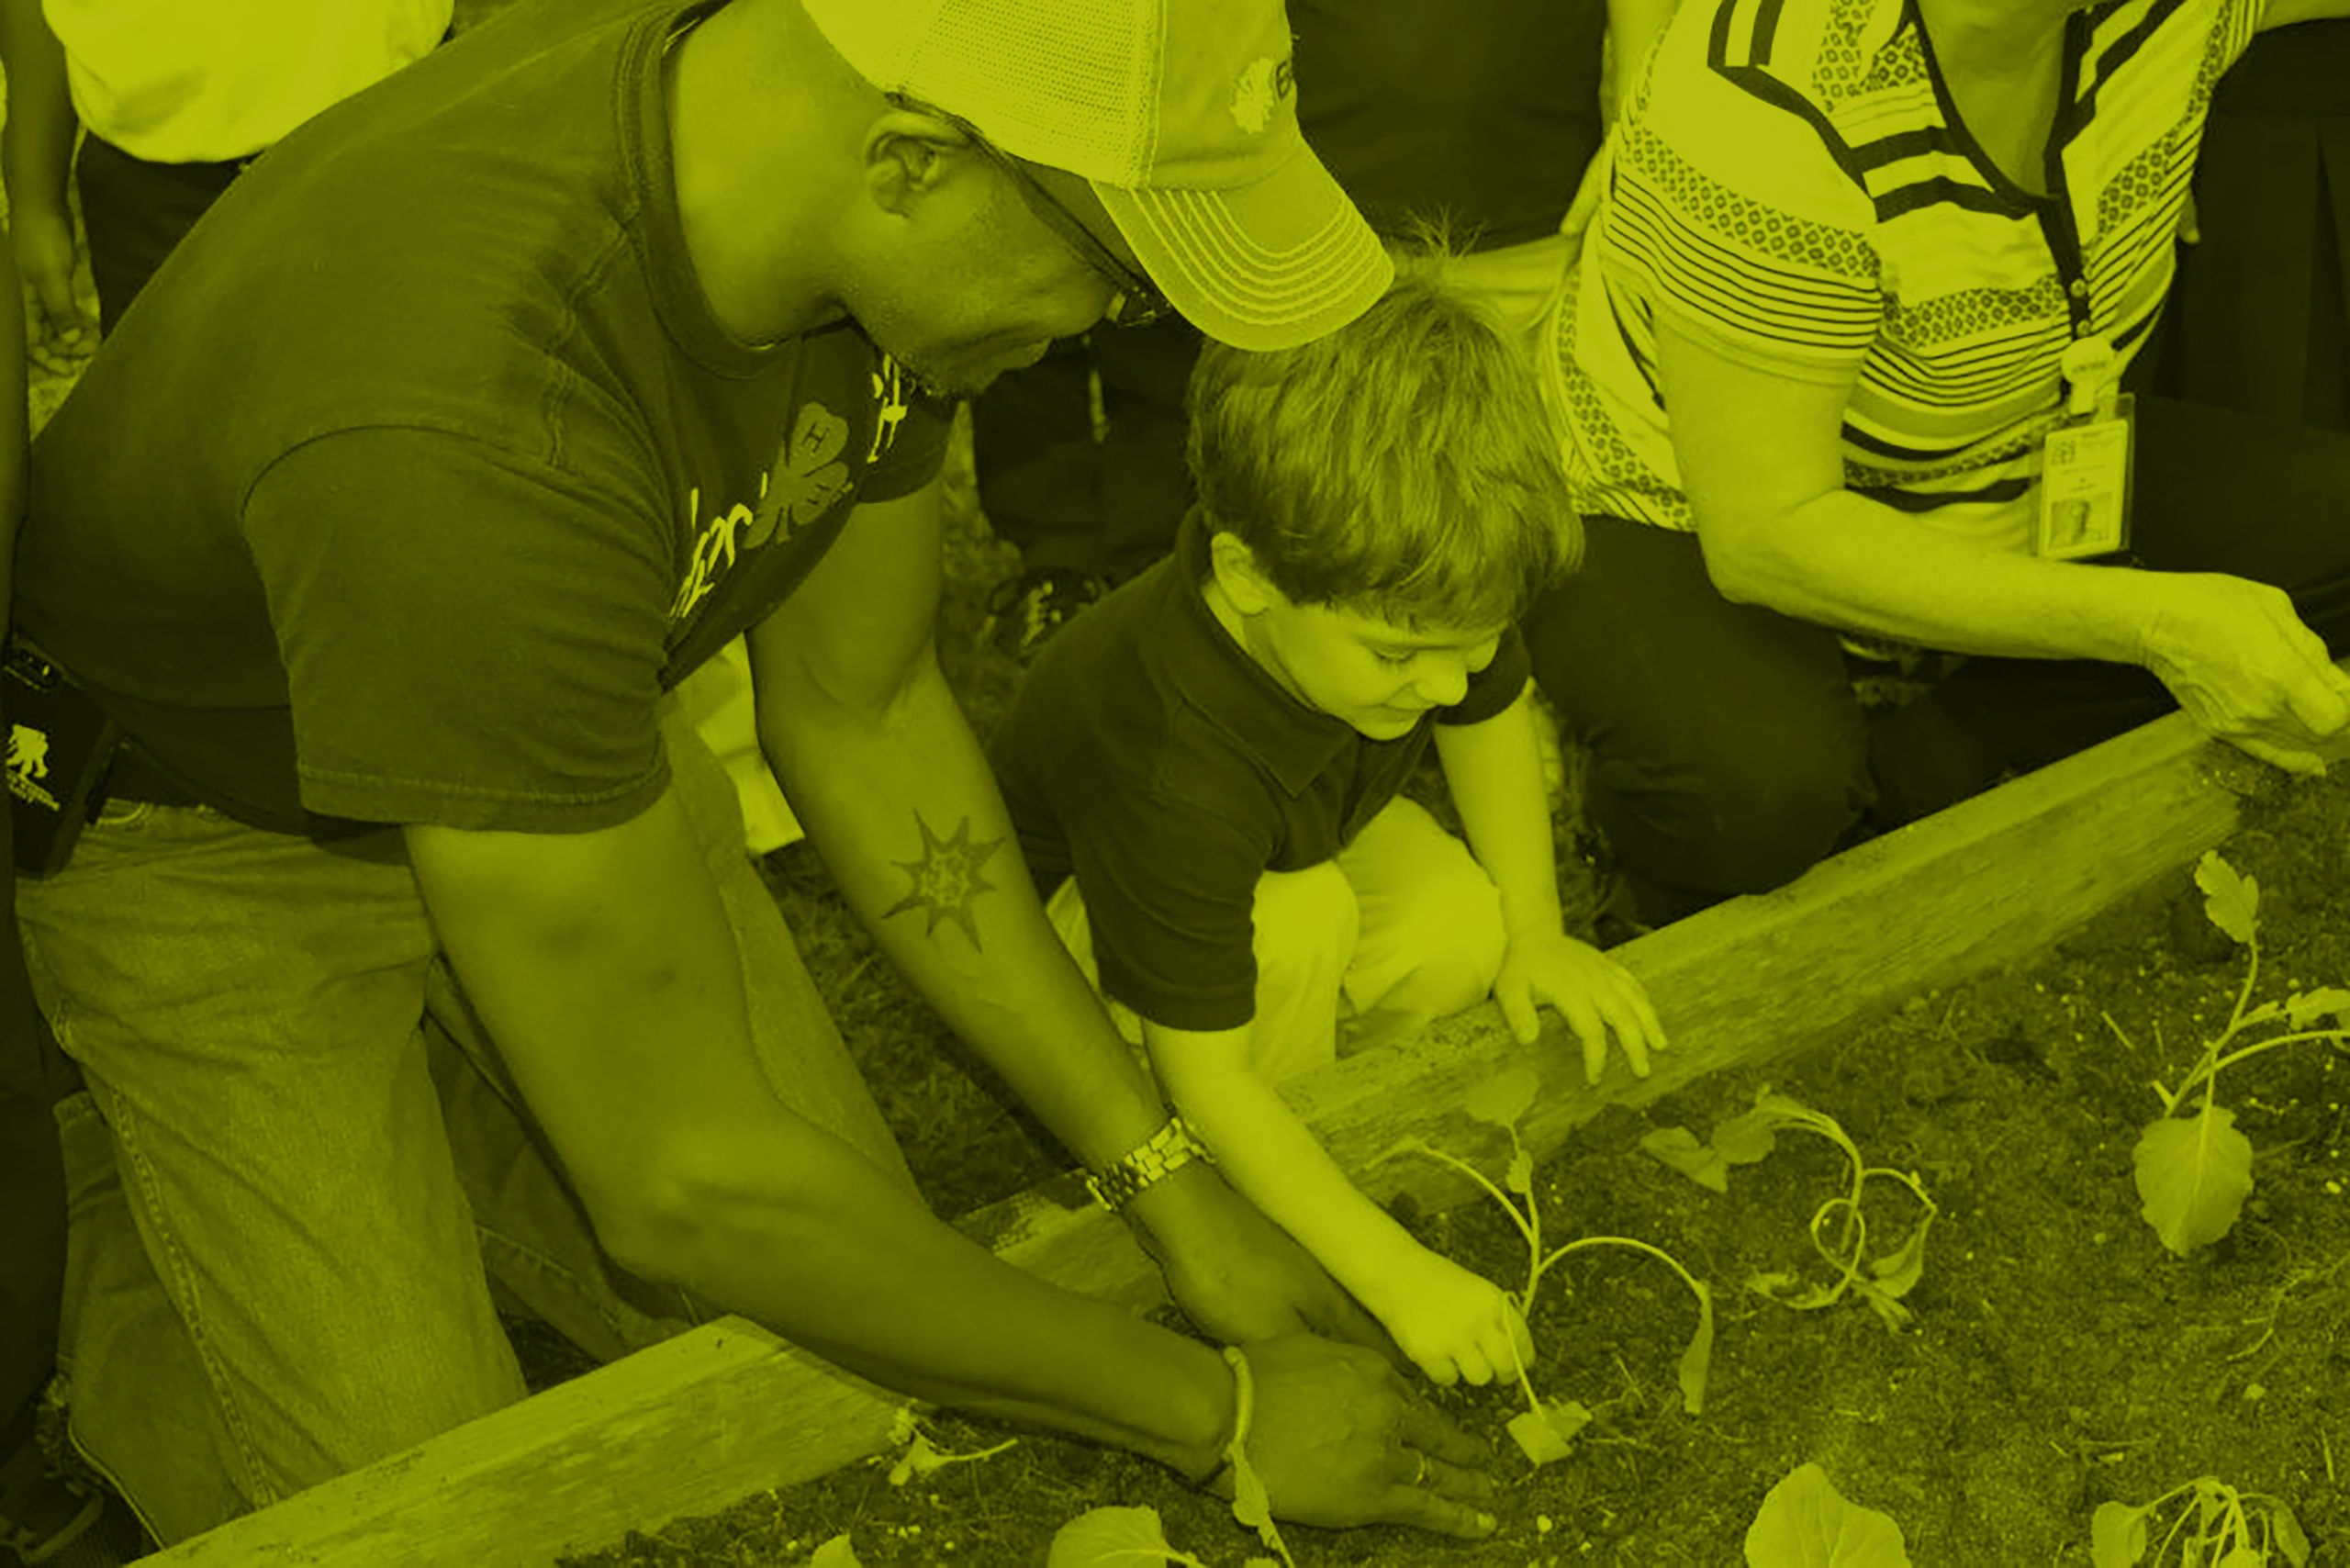 Overhead shot of agent planting in a flowerbed with a young child.